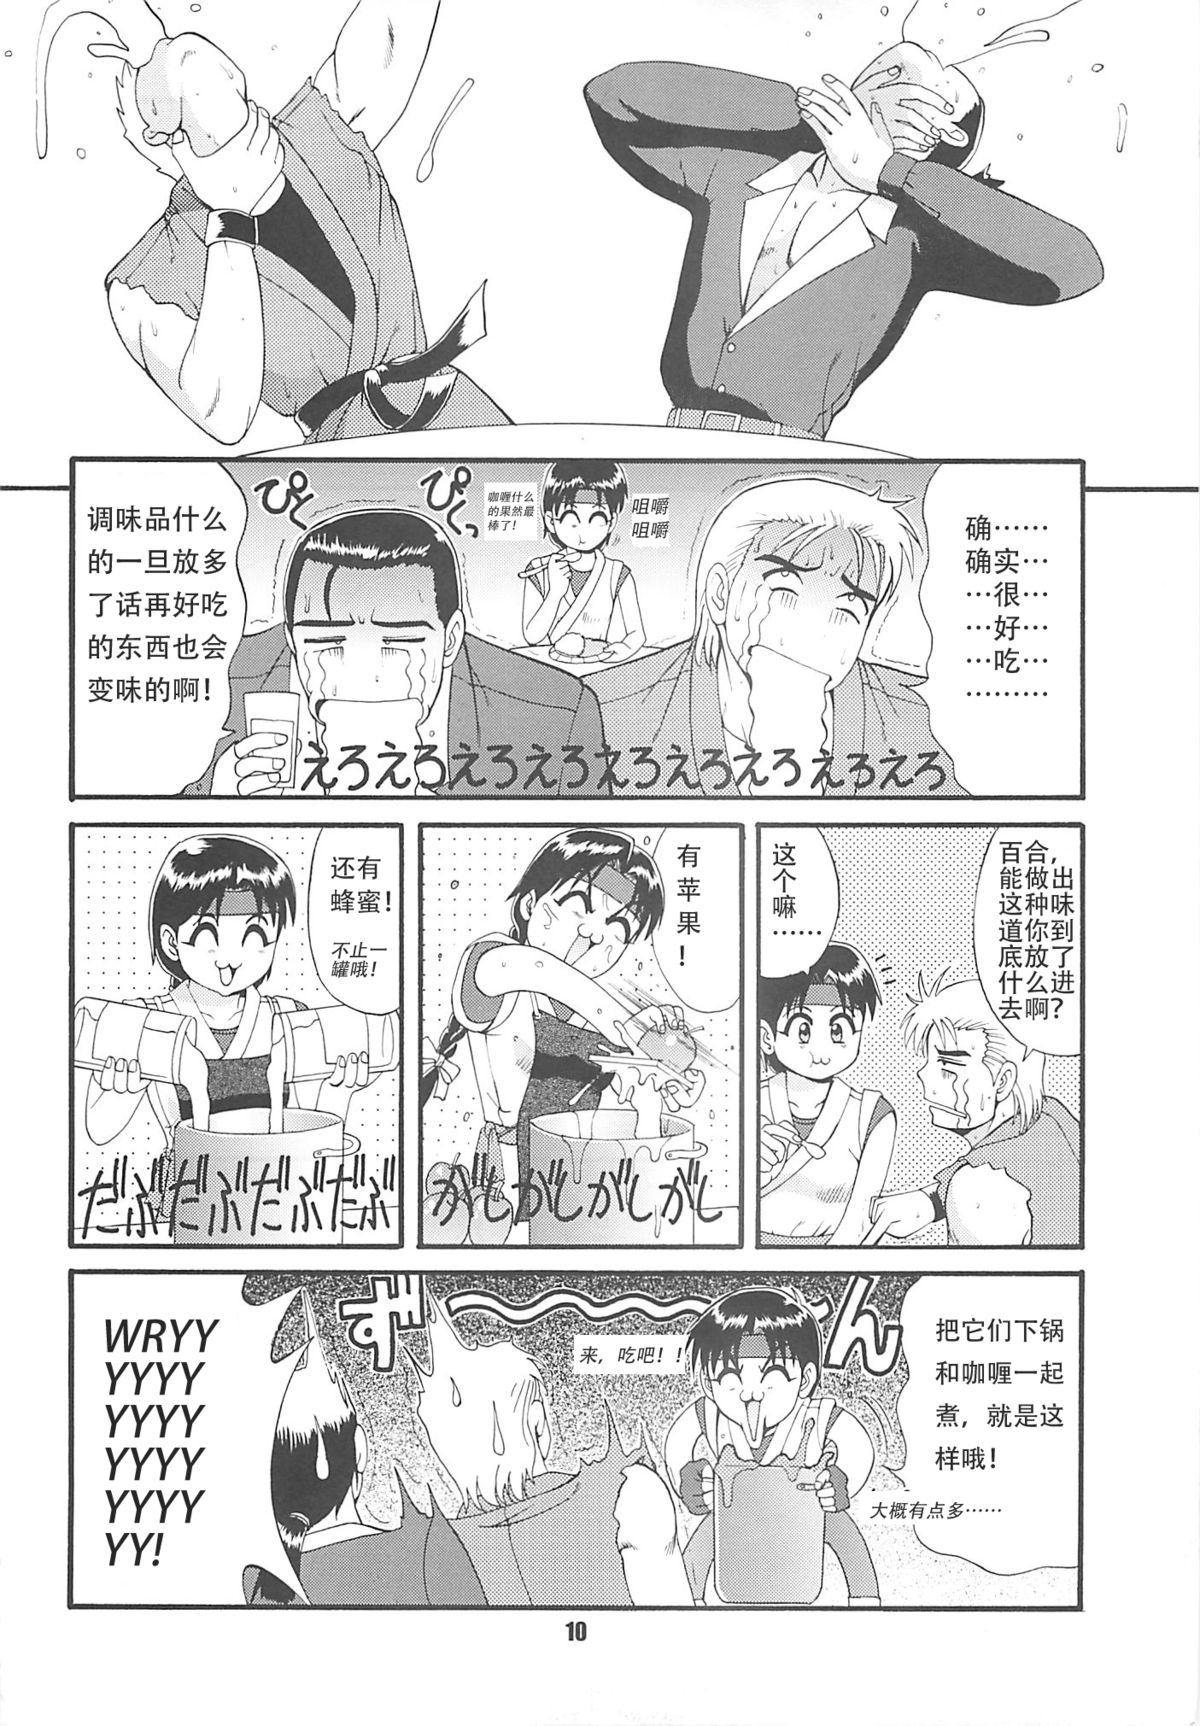 Hugecock The Yuri & Friends '97 - King of fighters Tiny Tits - Page 10